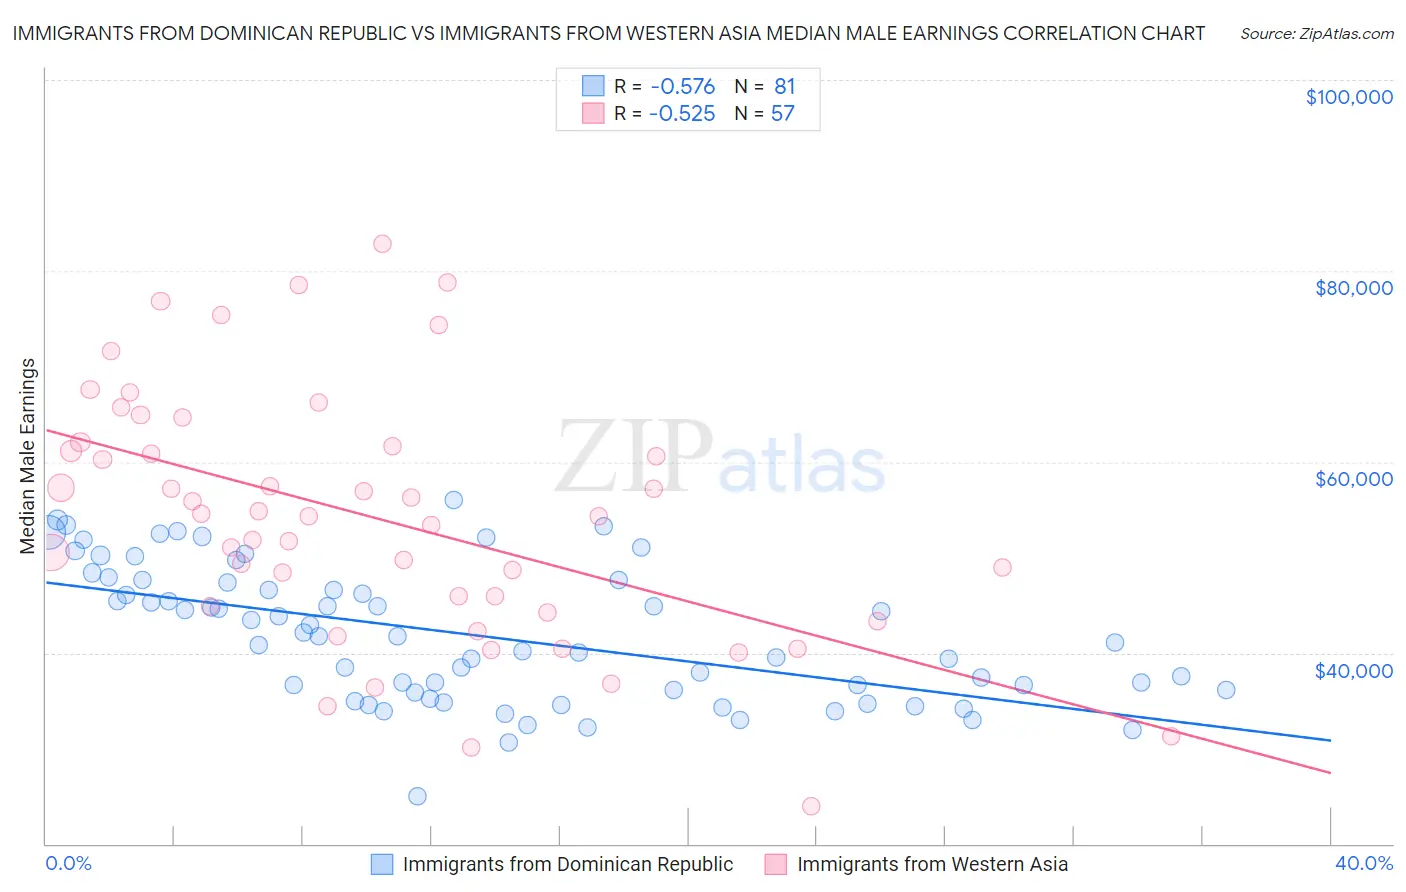 Immigrants from Dominican Republic vs Immigrants from Western Asia Median Male Earnings